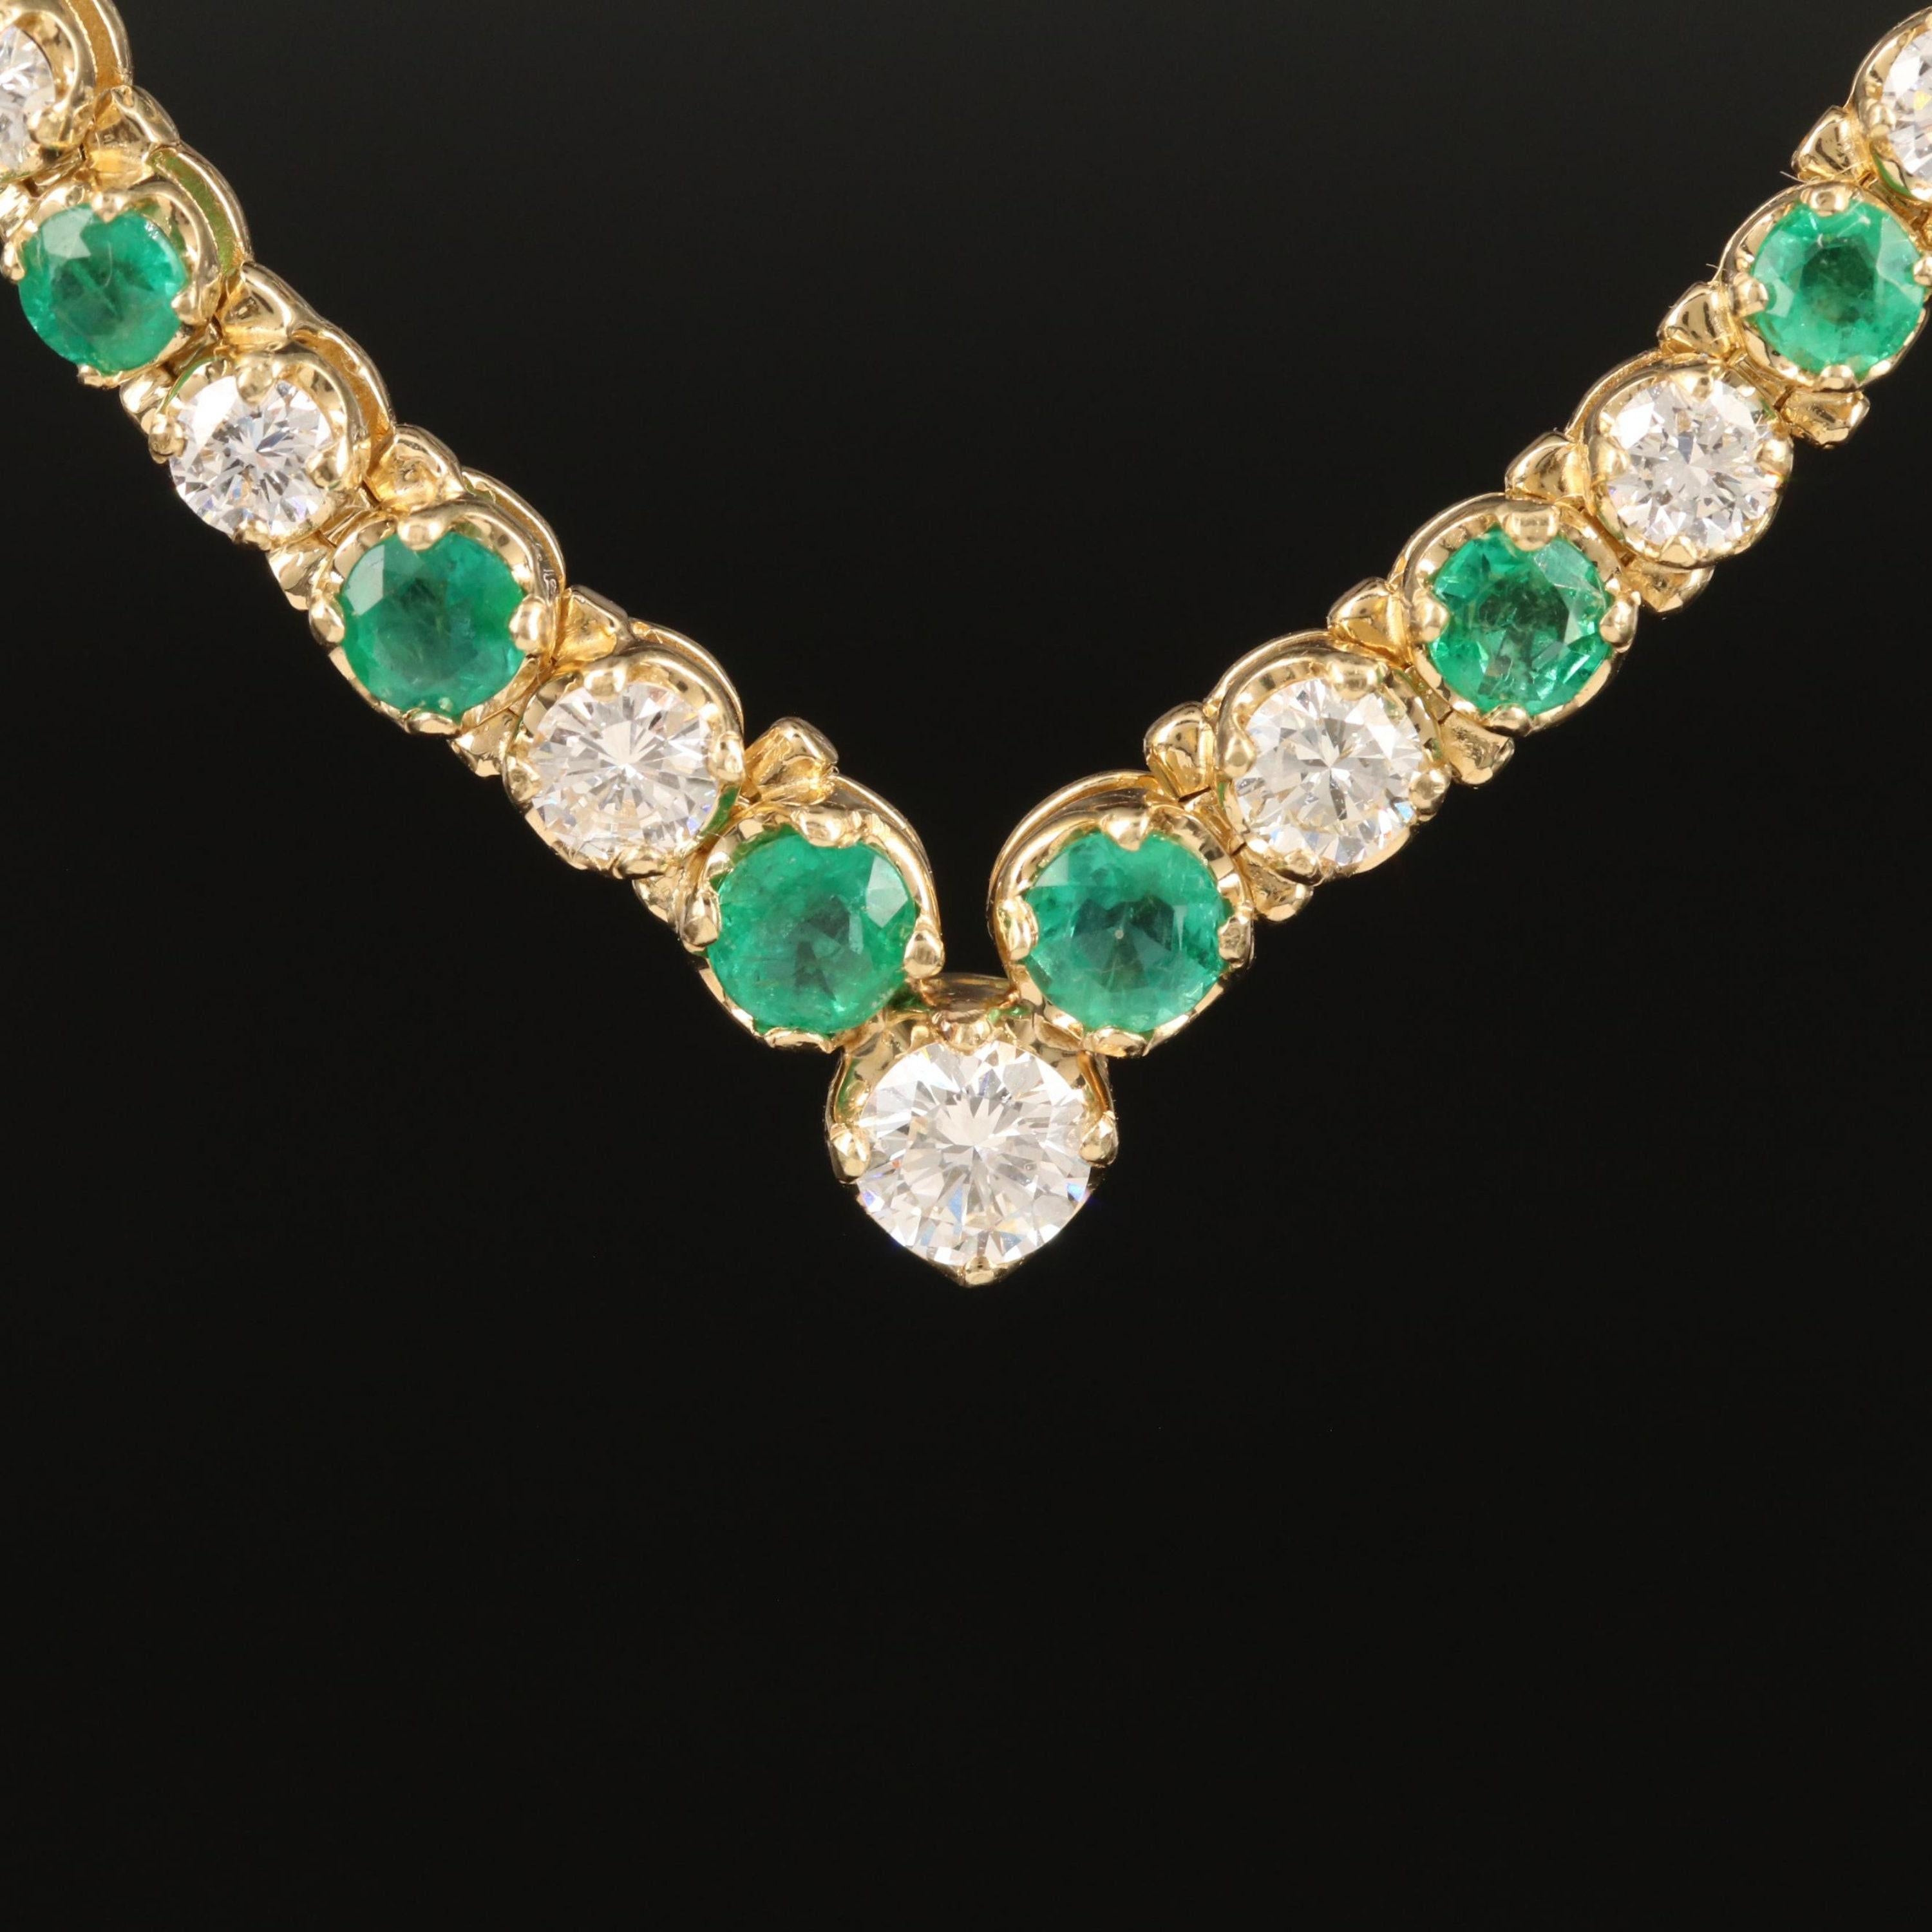 Unique Round Cut Emerald Diamonds Chevron Necklace, - Natural Emerald Diamond Gold Necklace, Vintage Diamond Gold Necklace For Her
 
 Item Description
 → Handmade, Made to order
 → Material: SOLID 18K/18K GOLD
 
 
 Stone Details
 
 → Primary